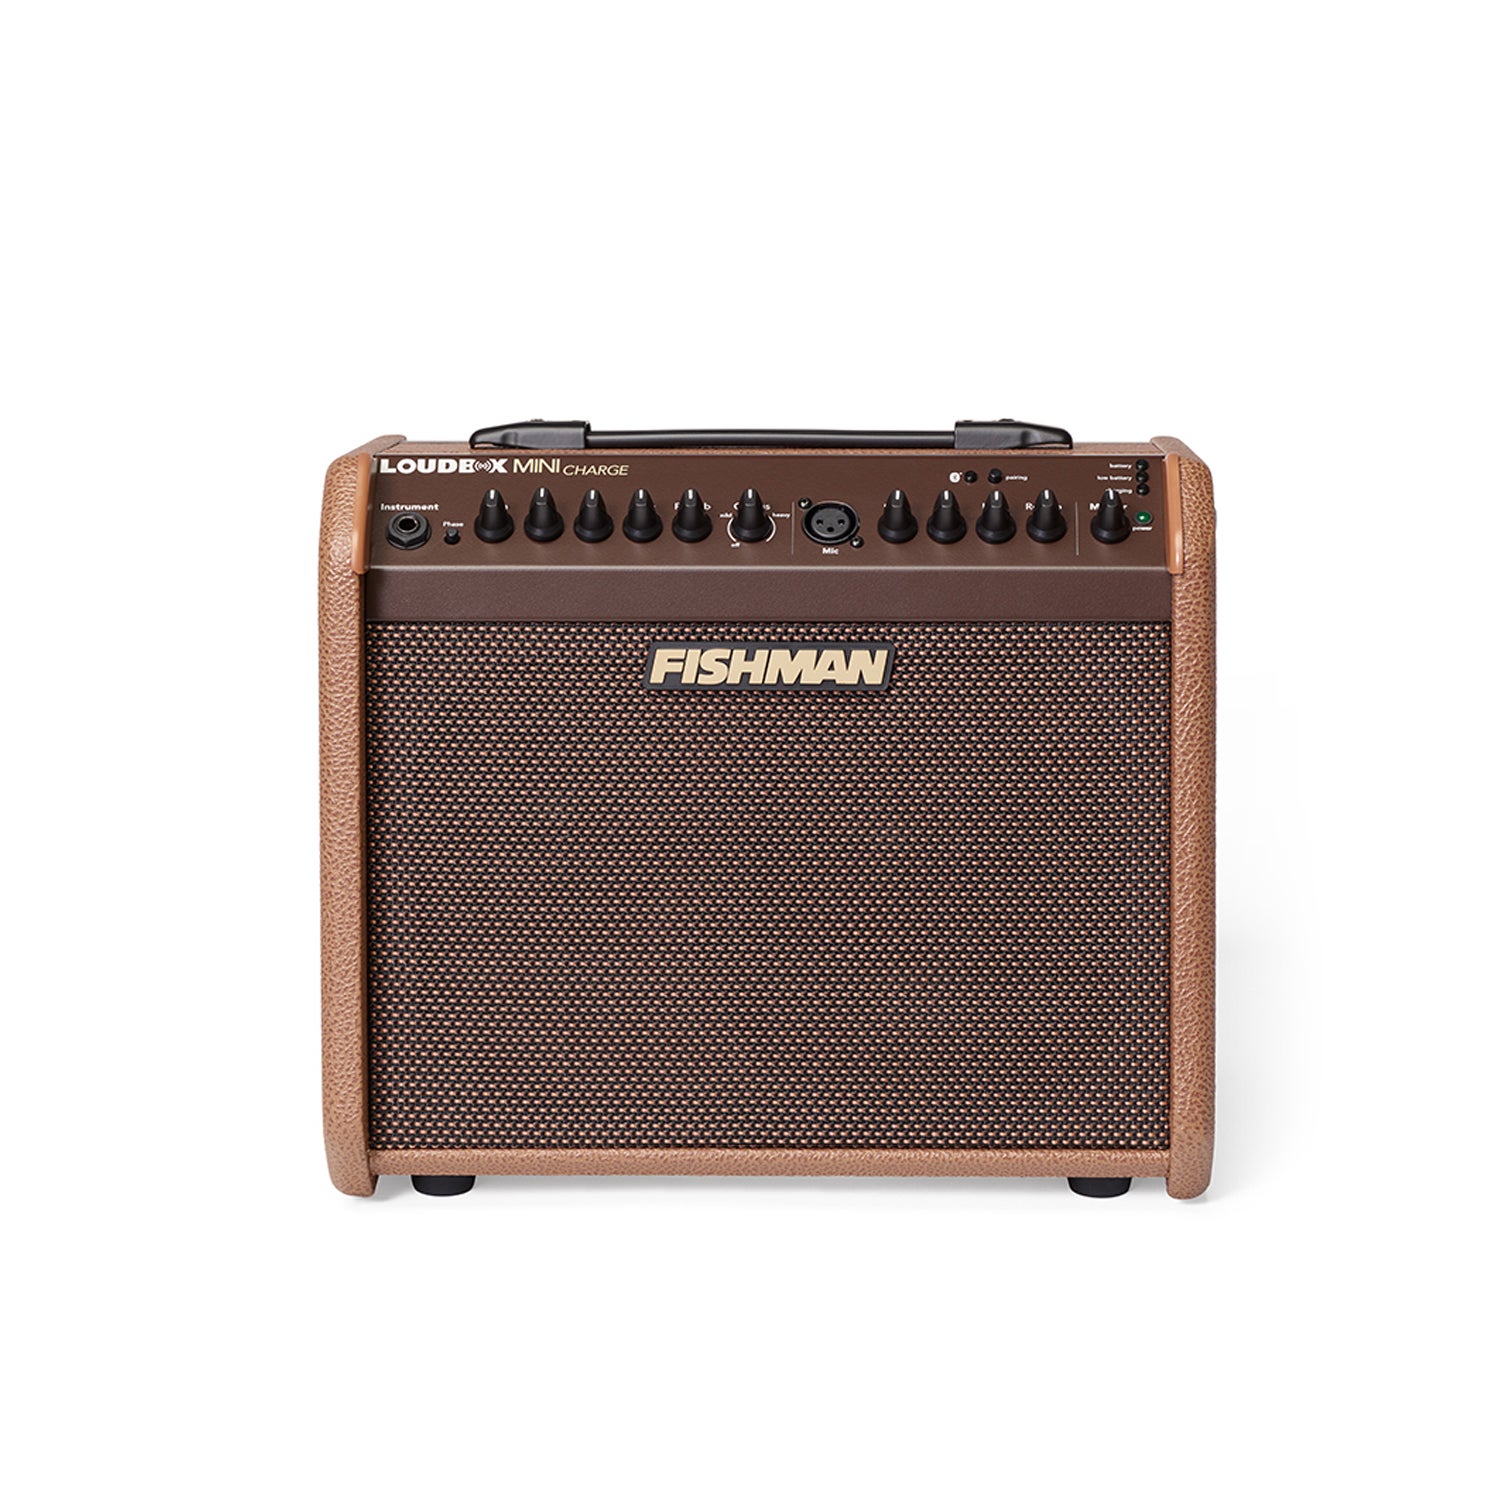 https://www.musicworks.co.nz/content/products/fishman-loud-charge-electric-acoustic-guitar-amplifier-mini-battery-powered-rechargeable-amplifier-60w-1-loudcharge.jpg?canvas=1:1&width=2500